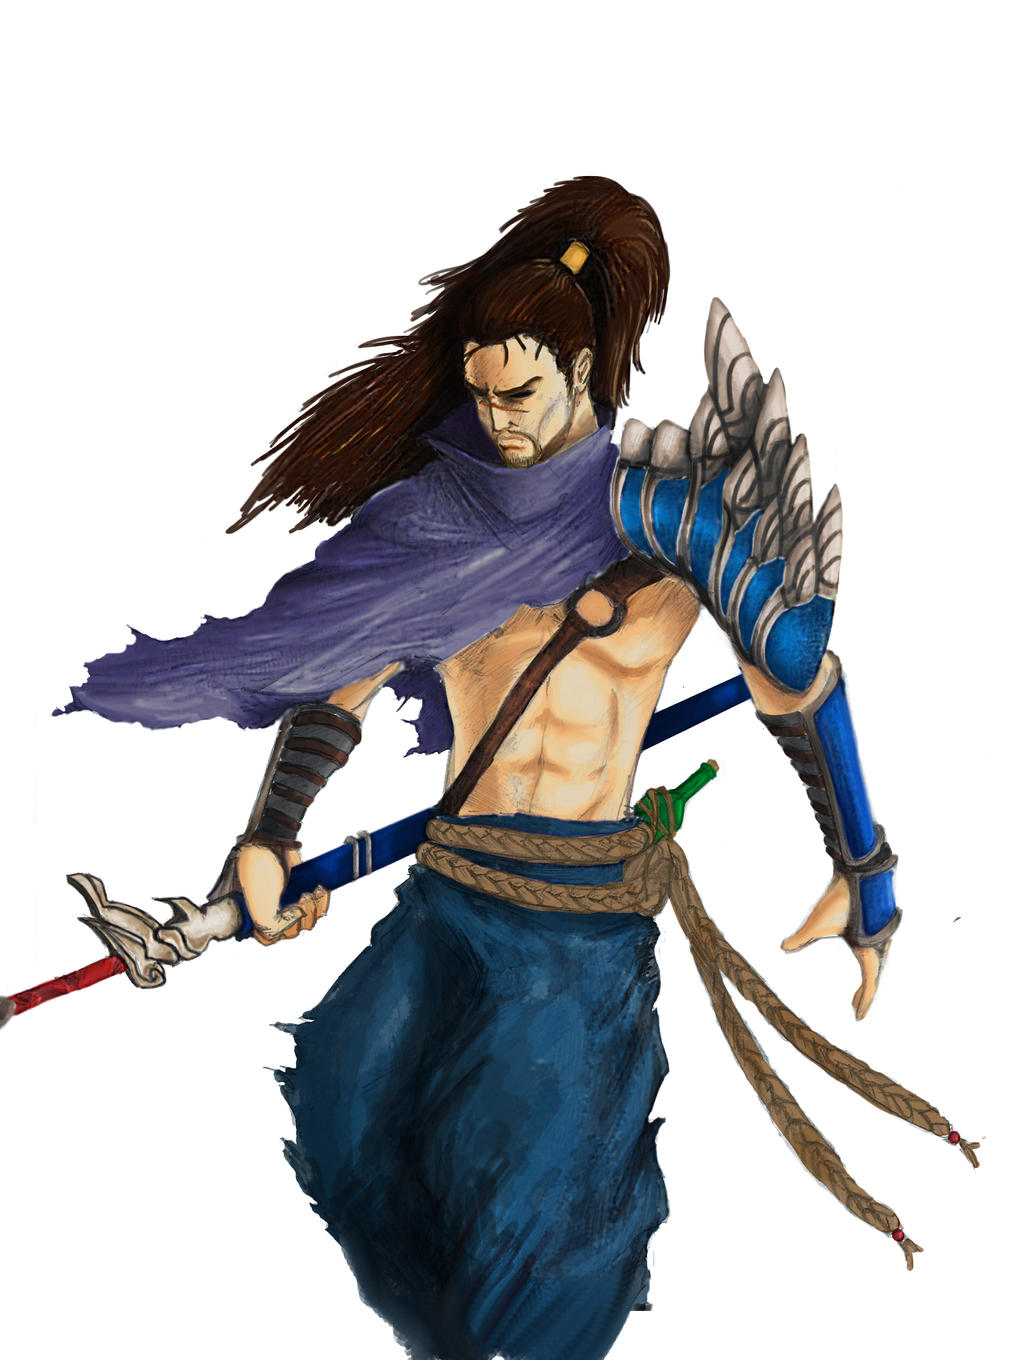 Yasuo, the unforgiven by Massimo-Weigert on DeviantArt